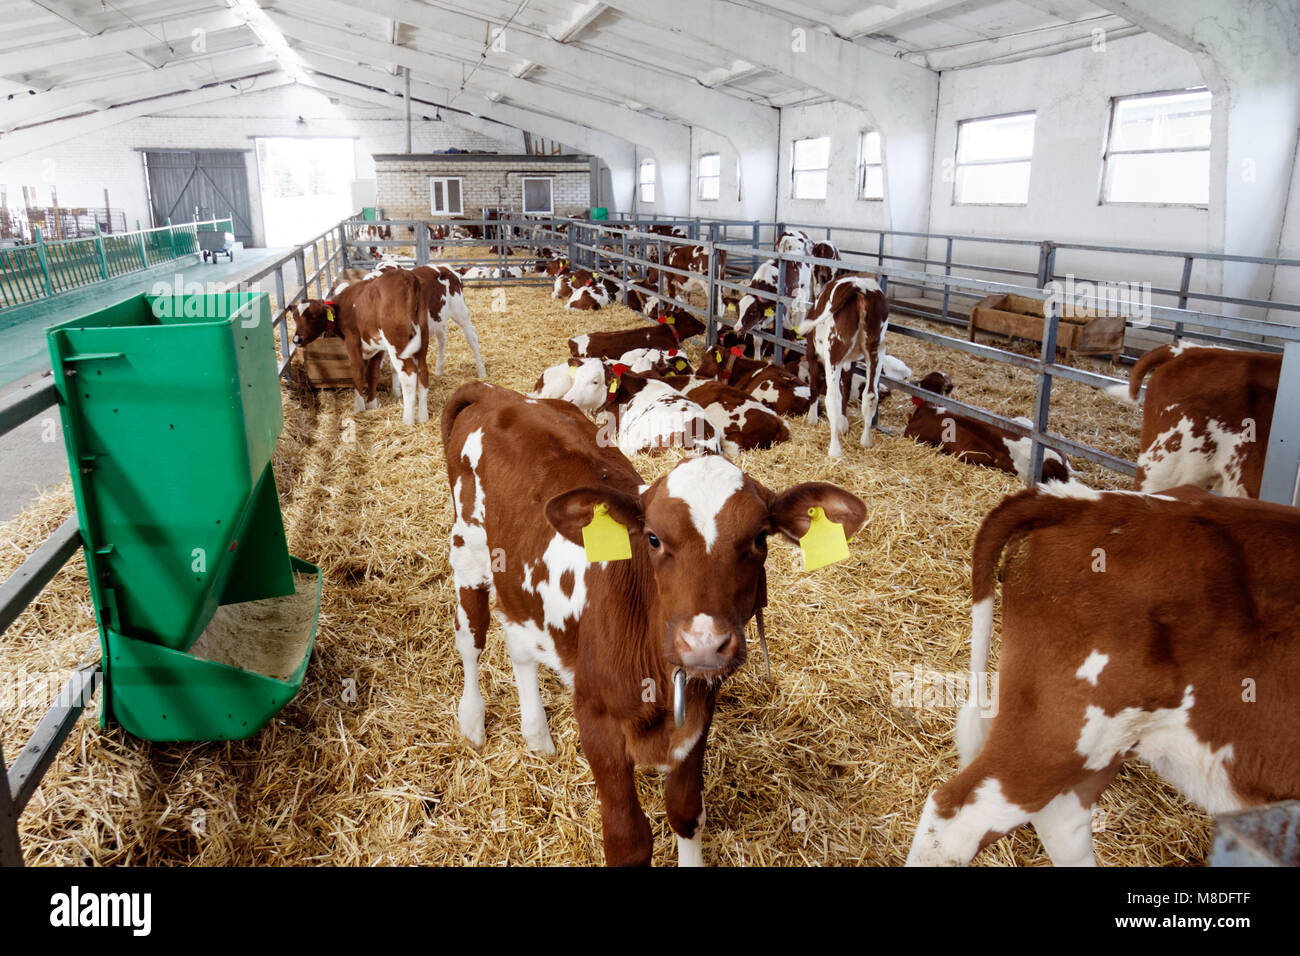 Dairy cows in a farm cowshed. Agriculture industry, farming and animal husbandry Stock Photo